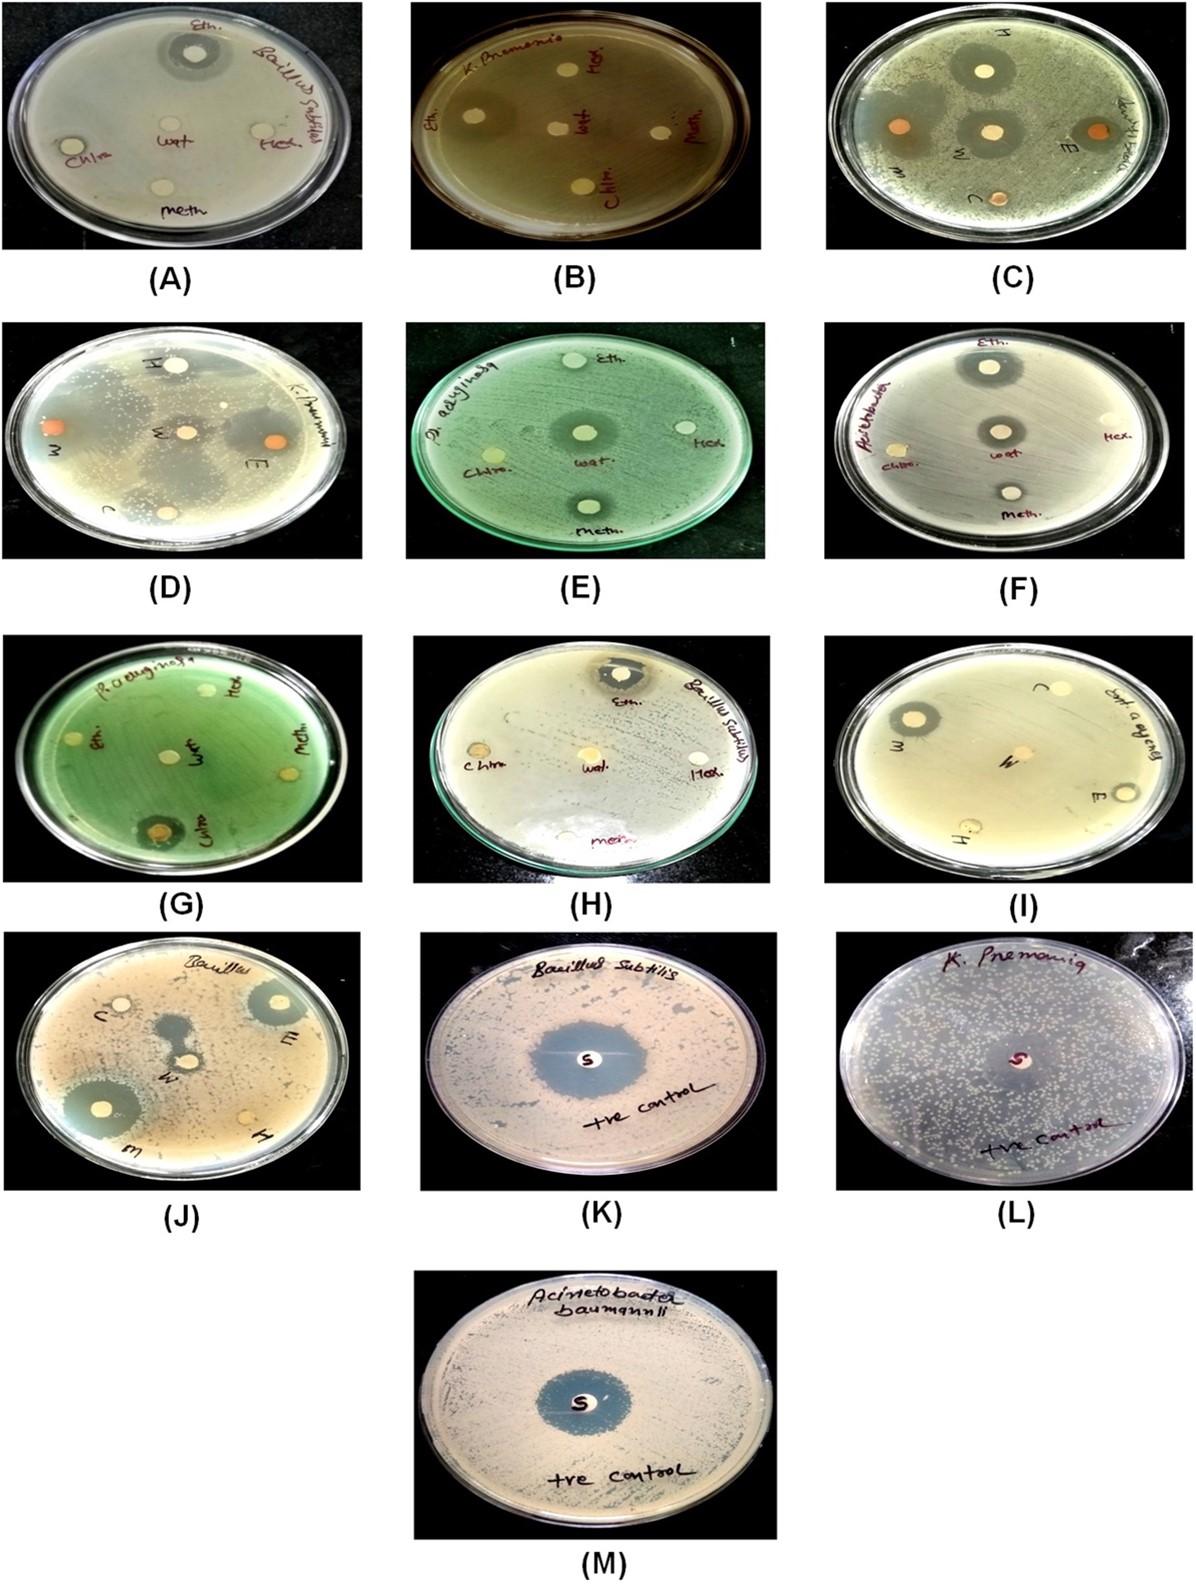 Antimicrobial and phytochemical screening of selected wild mushrooms naturally found in Garhwal Himalayan region, Uttarakhand, India